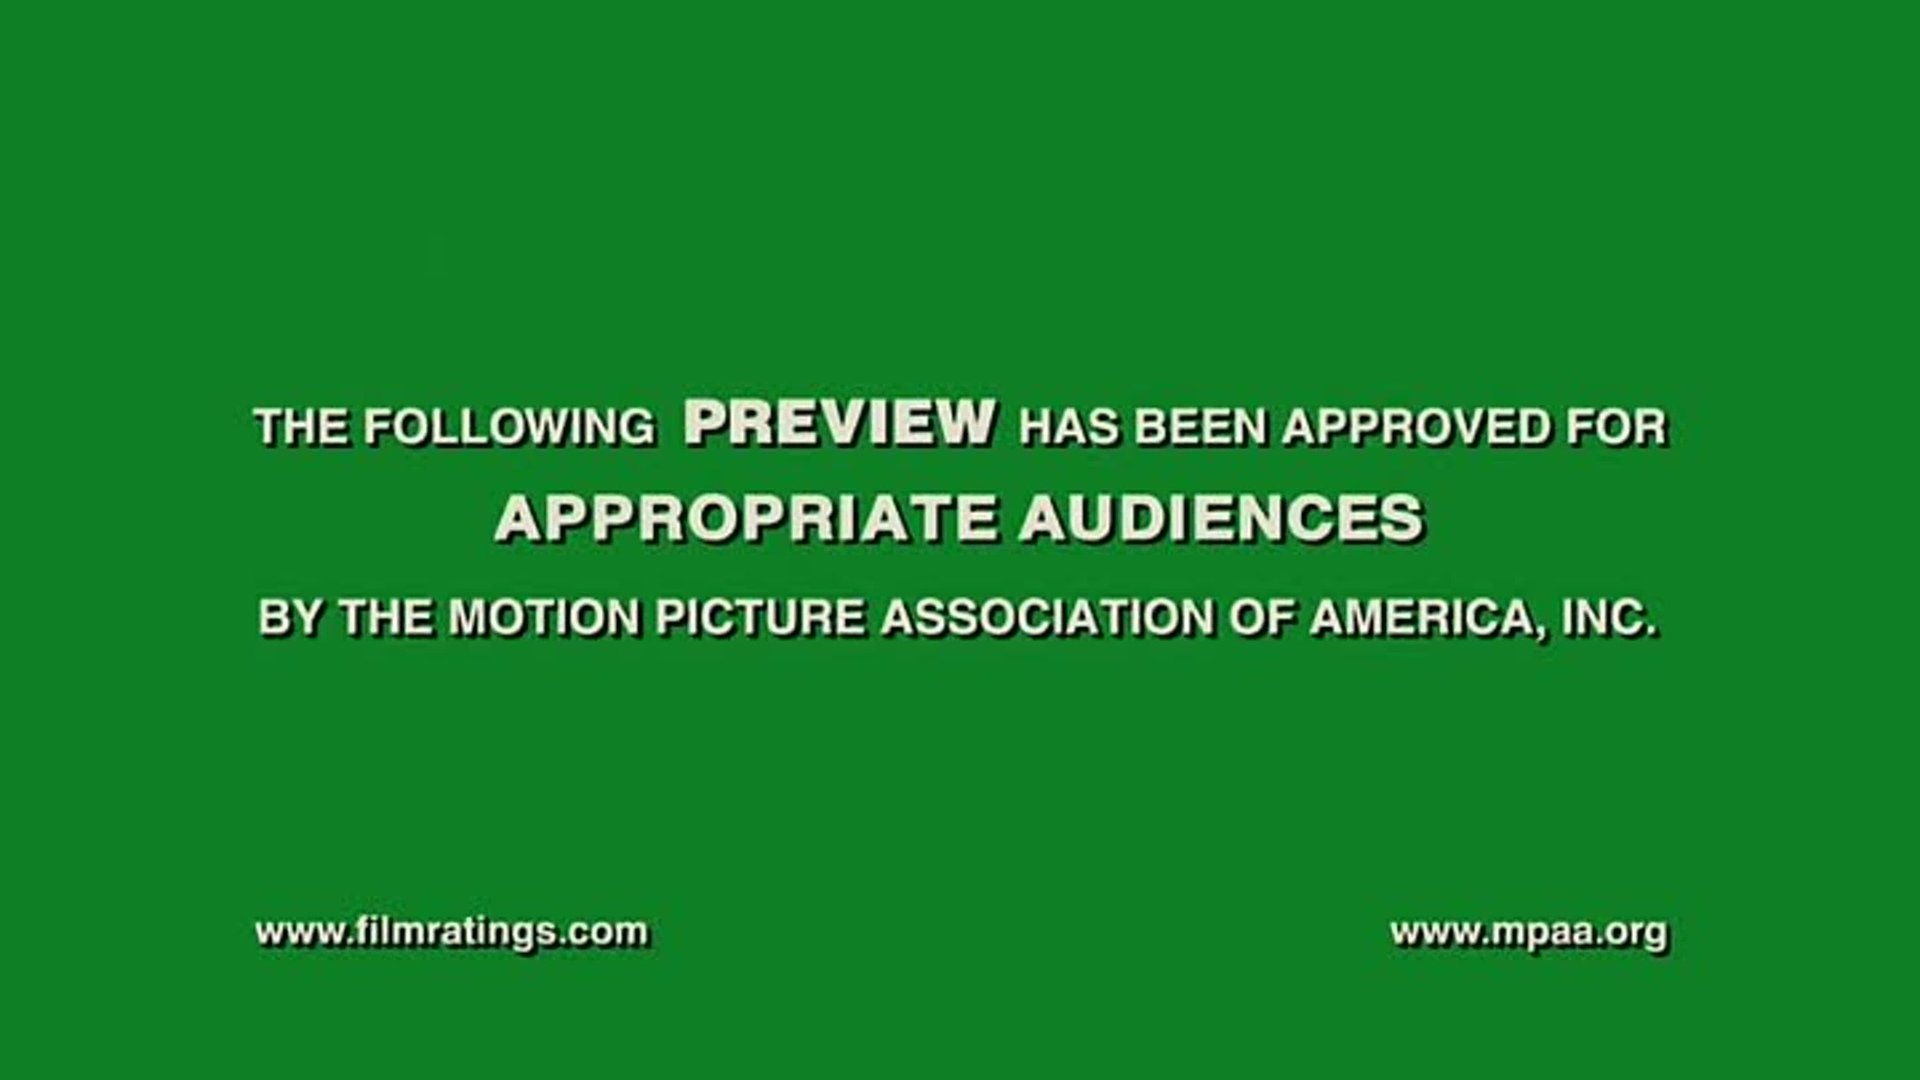 Appropriate audiences. The following Preview has been approved for all audiences by the Motion picture Association of America. The following Preview has been approved. The following Preview has been approved for all audiences PG 13.